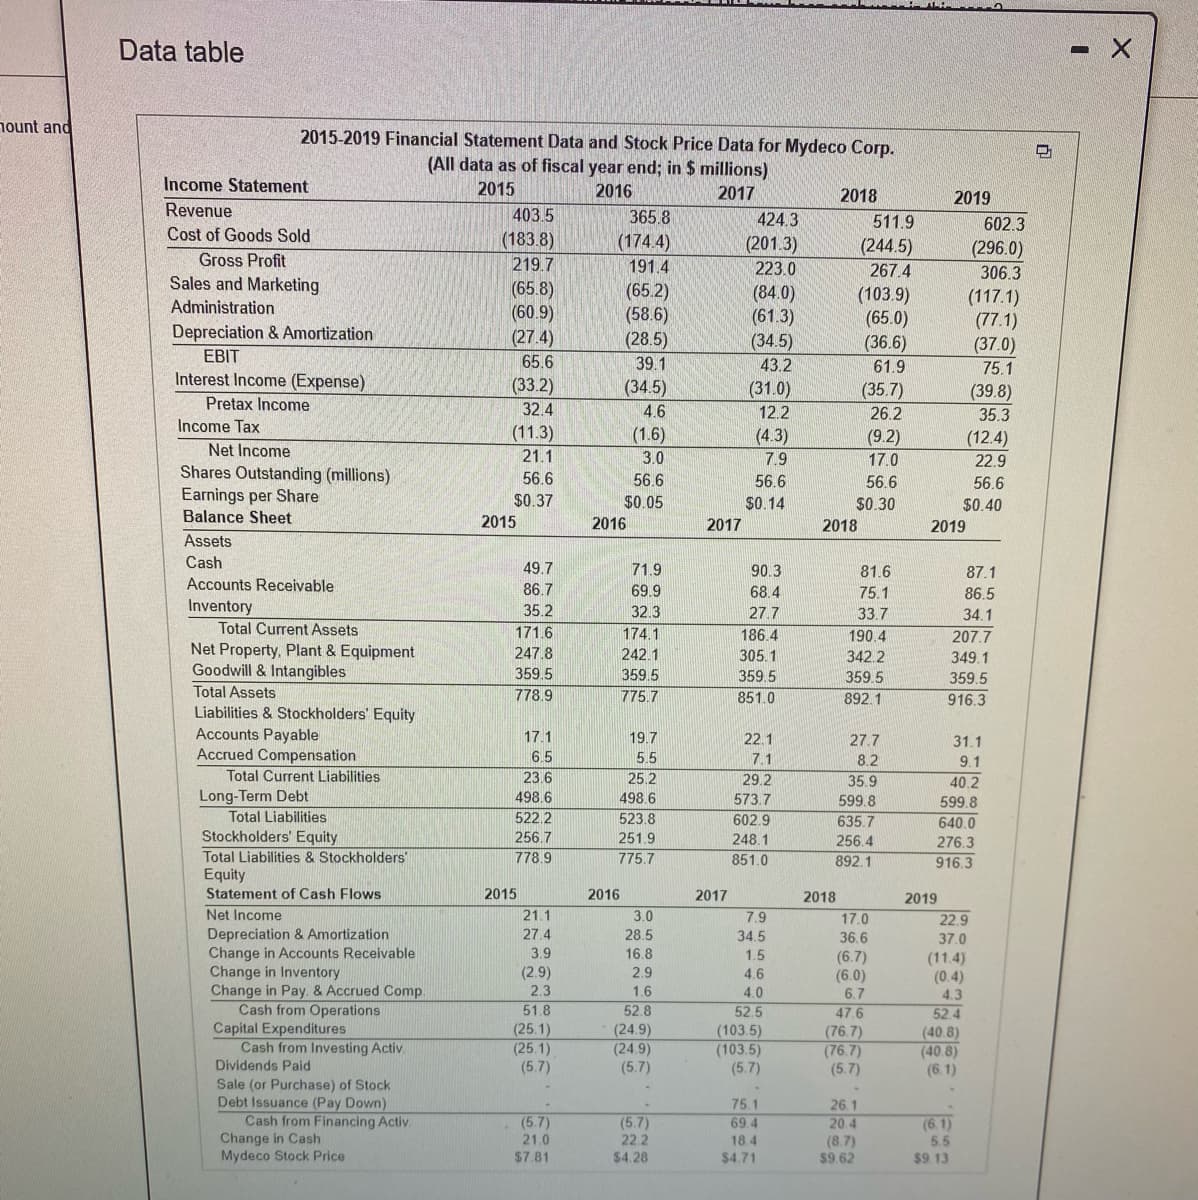 Data table
nount and
2015-2019 Financial Statement Data and Stock Price Data for Mydeco Corp.
(All data as of fiscal year end; in $ millions)
Income Statement
2015
2016
2017
2018
2019
Revenue
403.5
365.8
424.3
511.9
602.3
Cost of Goods Sold
(183.8)
(174.4)
(201.3)
(244.5)
(296.0)
Gross Profit
219.7
191.4
223.0
267.4
306.3
Sales and Marketing
(65.8)
(60.9)
(27.4)
(65.2)
(58.6)
(28.5)
(84.0)
(61.3)
(34.5)
(103.9)
(65.0)
(36.6)
(117.1)
(77.1)
(37.0)
75.1
Administration
Depreciation & Amortization
EBIT
65.6
39.1
43.2
61.9
Interest Income (Expense)
(33.2)
(34.5)
(31.0)
(35.7)
(39.8)
Pretax Income
32.4
4.6
12.2
26.2
35.3
Income Tax
(11.3)
(1.6)
(4.3)
(9.2)
(12.4)
Net Income
21.1
3.0
7.9
17.0
22.9
Shares Outstanding (millions)
Earnings per Share
Balance Sheet
56.6
56.6
56.6
56.6
56.6
$0.37
2015
$0.05
$0.14
$0.30
$0.40
2016
2017
2018
2019
Assets
Cash
49.7
71.9
90.3
81.6
87.1
Accounts Receivable
86.7
69.9
68.4
75.1
86.5
Inventory
Total Current Assets
35.2
32.3
27.7
33.7
34.1
171.6
174.1
186.4
190.4
207.7
Net Property, Plant & Equipment
Goodwill & Intangibles
247.8
242.1
305.1
342.2
349.1
359.5
359 5
359.5
359.5
359.5
Total Assets
778.9
775.7
851.0
892.1
916.3
Liabilities & Stockholders' Equity
Accounts Payable
Accrued Compensation
17.1
19.7
22.1
27.7
31.1
6.5
5.5
7.1
8.2
9.1
Total Current Liabilities
23.6
25.2
29.2
35.9
40.2
Long-Term Debt
498.6
498.6
573.7
599.8
599.8
Total Liabilities
522.2
523.8
602.9
635.7
640.0
Stockholders' Equity
256.7
251.9
248.1
256.4
276.3
Total Liabilities & Stockholders'
778.9
775.7
851.0
892.1
916.3
Statement of Cash Flows
2015
2016
2017
2018
2019
Net Income
21.1
3.0
7.9
34.5
17.0
22.9
Depreciation & Amortization
Change in Accounts Receivable
Change in Inventory
Change in Pay. & Accrued Comp.
Cash from Operations
Capital Expenditures
Cash from Investing Activ.
27.4
28.5
36.6
37.0
3.9
16.8
1.5
(6.7)
(6.0)
(11.4)
(0.4)
(2.9)
2.9
4.6
2.3
1.6
4.0
6.7
4.3
52.8
52.5
(103.5)
(103.5)
(5.7)
51.8
52.4
(40.8)
(40.8)
(6.1)
47.6
(25.1)
(25.1)
(5.7)
(24.9)
(24.9)
(5.7)
(76.7)
(76.7)
(5.7)
Dividends Paid
Sale (or Purchase) of Stock
Debt Issuance (Pay Down)
Cash from Financing Activ.
Change in Cash
Mydeco Stock Price
75.1
69.4
26.1
(5.7)
(5.7)
20.4
(8.7)
$9.62
(6.1)
5.5
21.0
22.2
18.4
$7.81
$4.28
$4.71
$9.13
